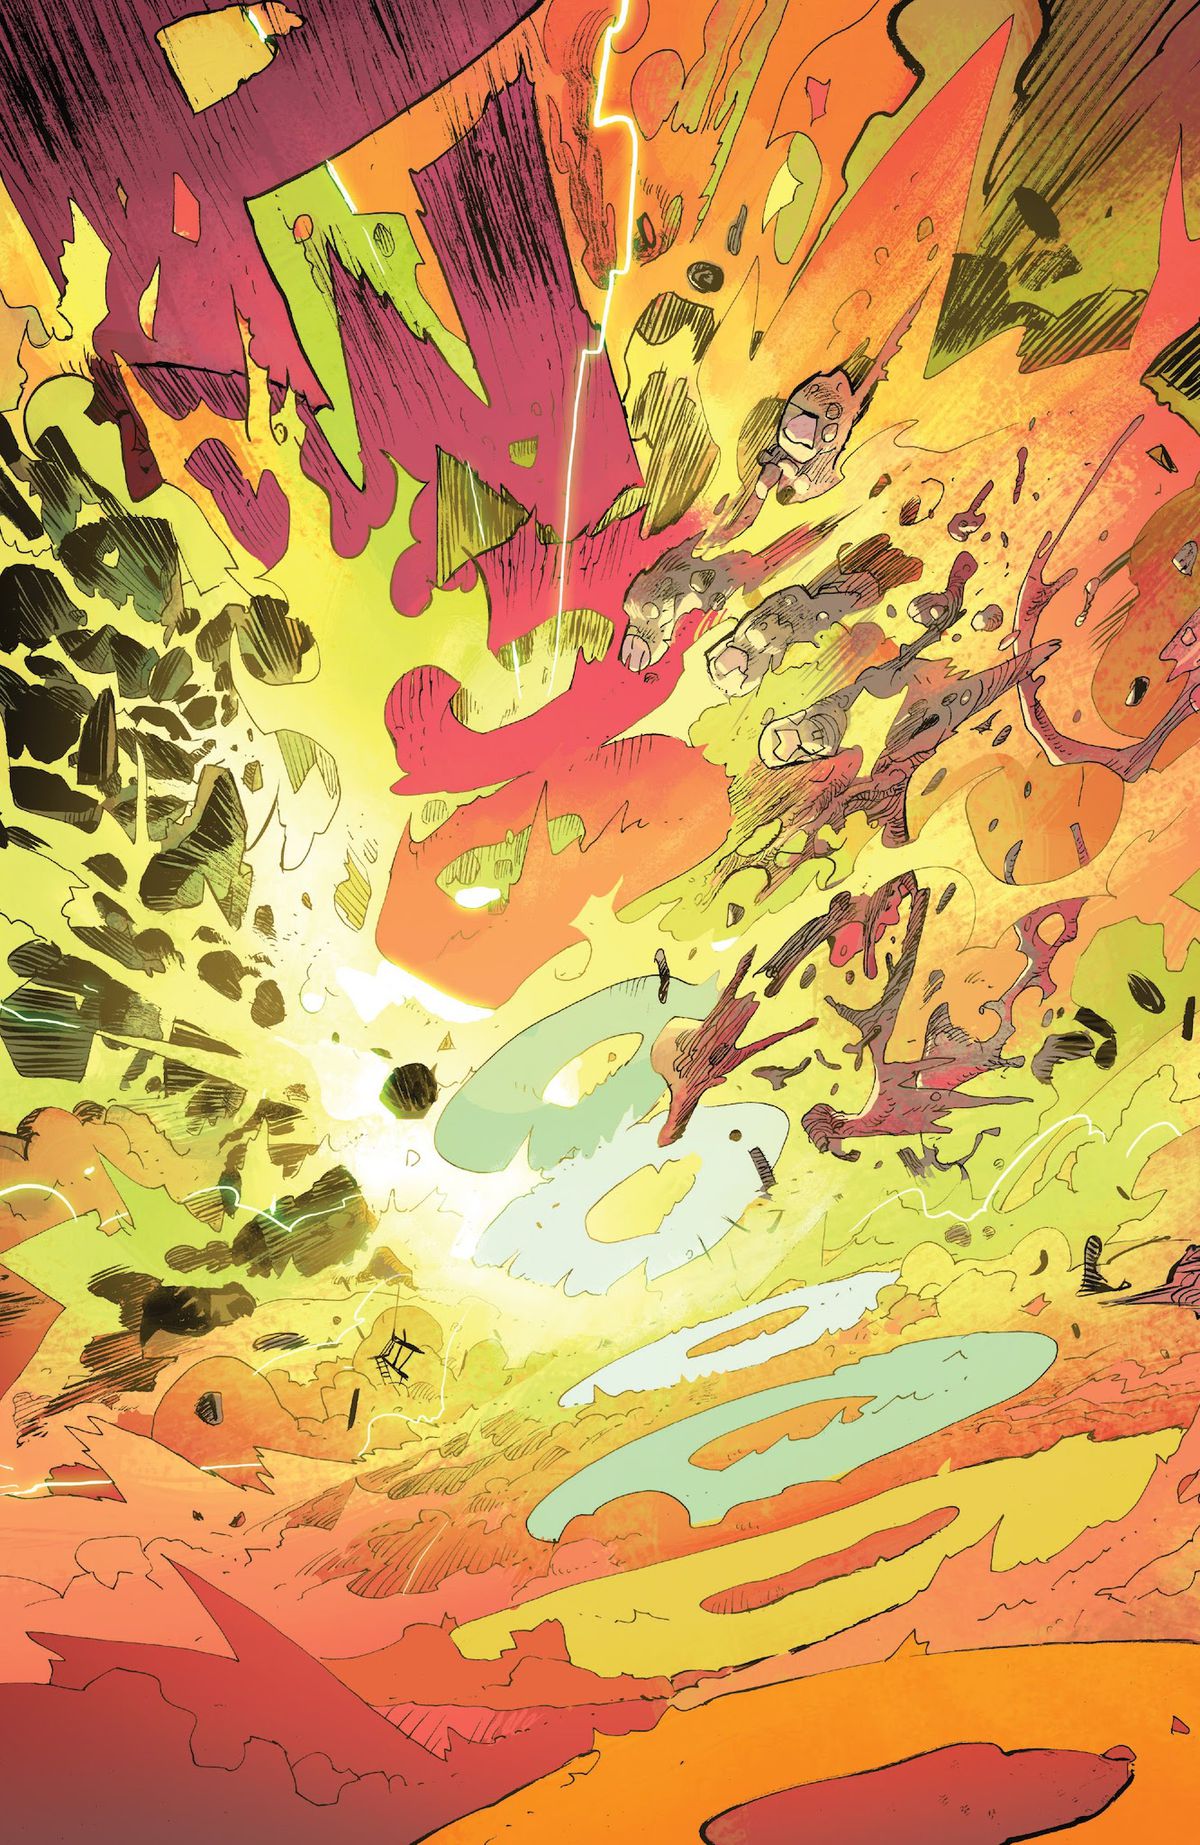 An explosion so big there’s barely anything else to see but bright colors and the huge sound effect PWOOOOOOO which is drawn as if it is the force of the explosion impacting the environment in Coda (2018).